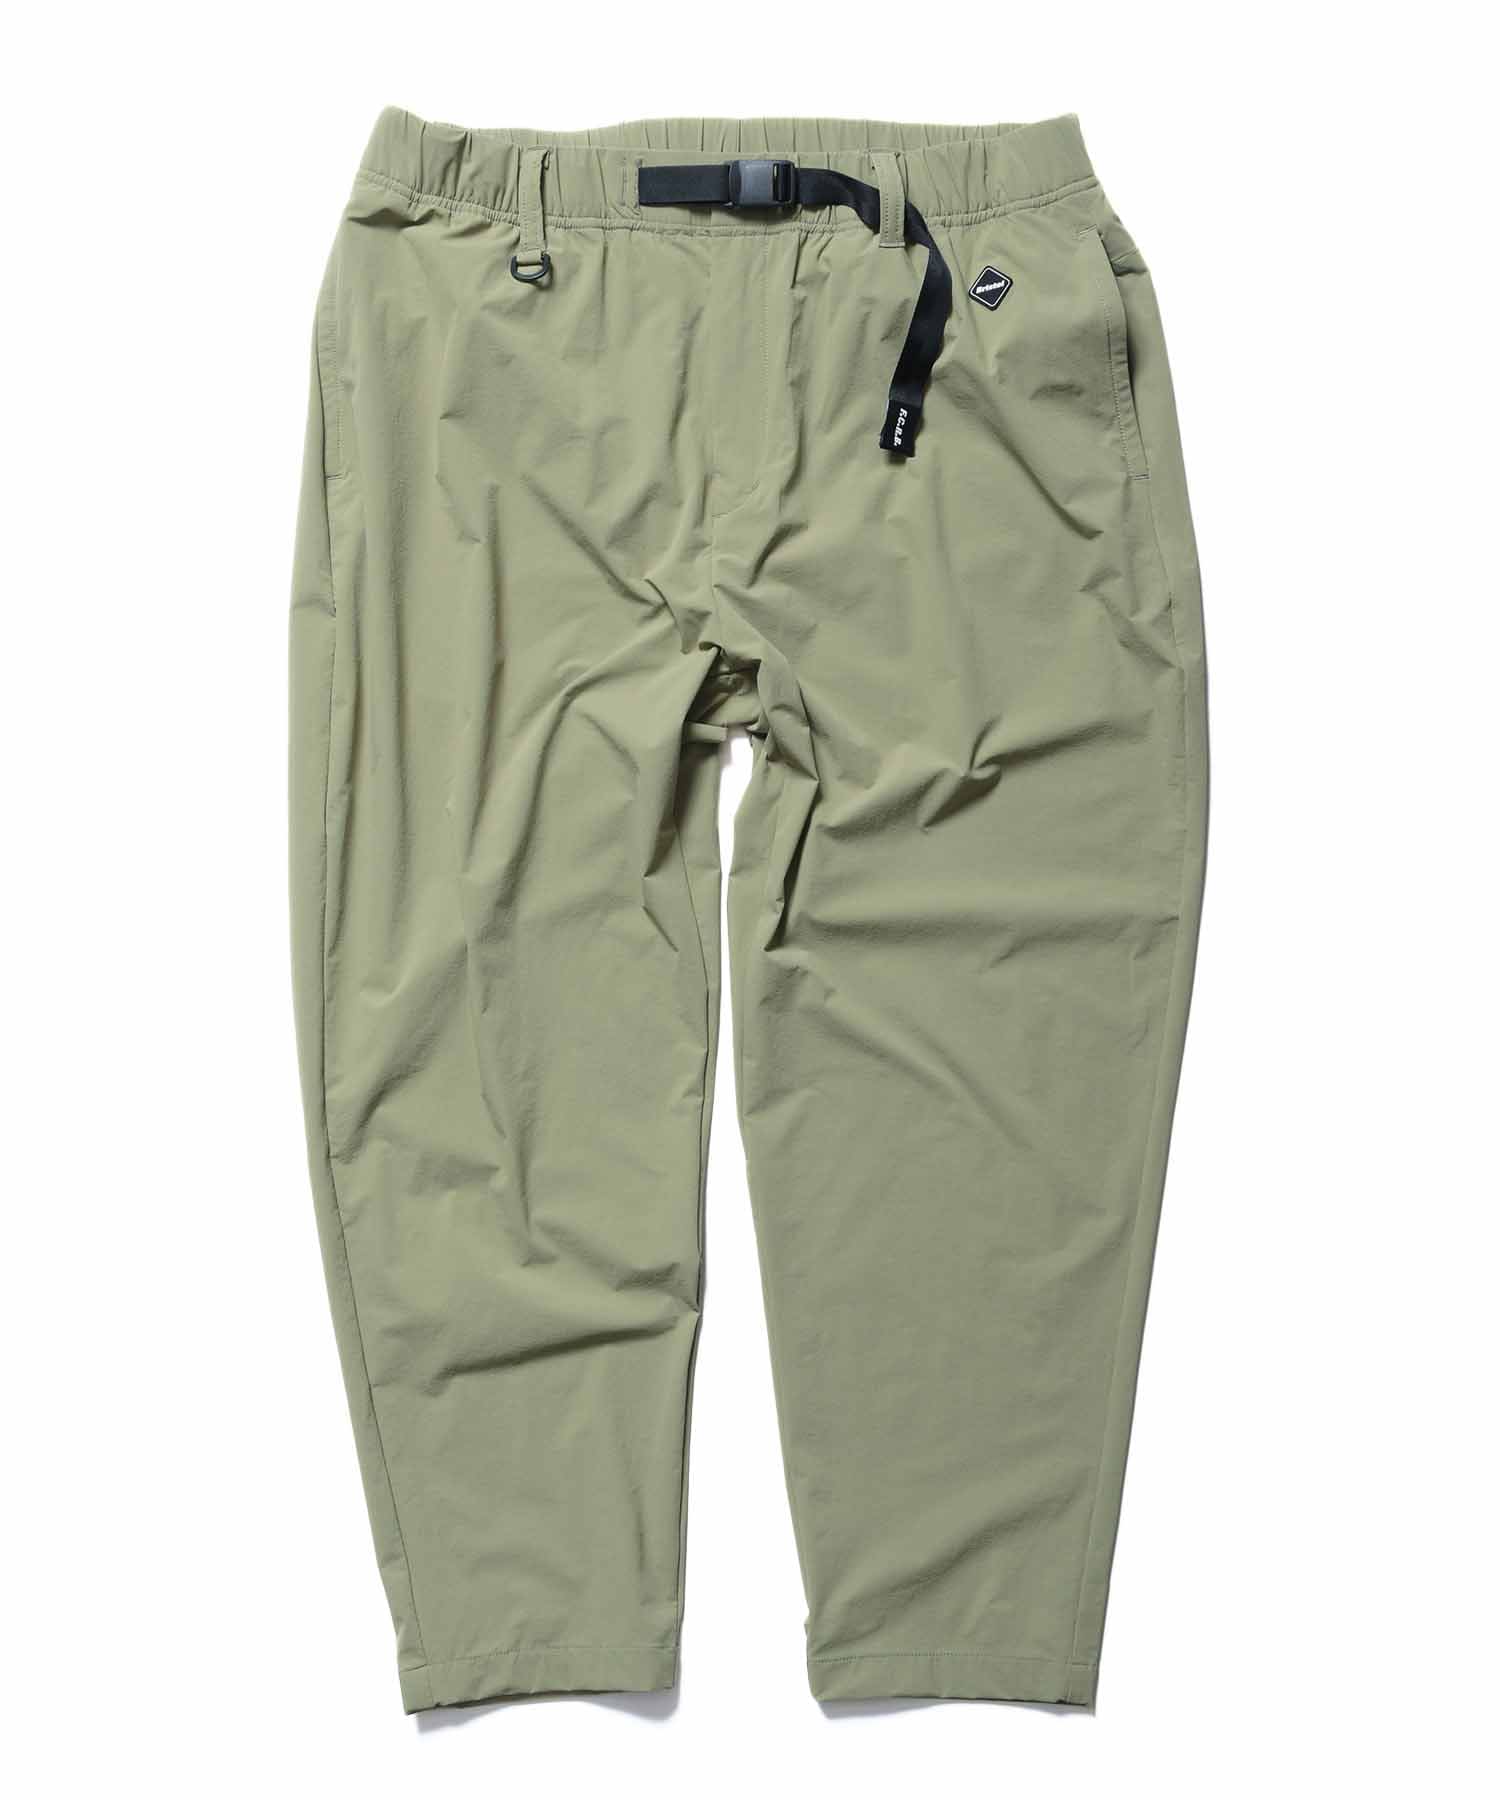 DRY ACTIVE STRETCH ADJUSTABLE UTILITY PANTS F.C.Real Bristol